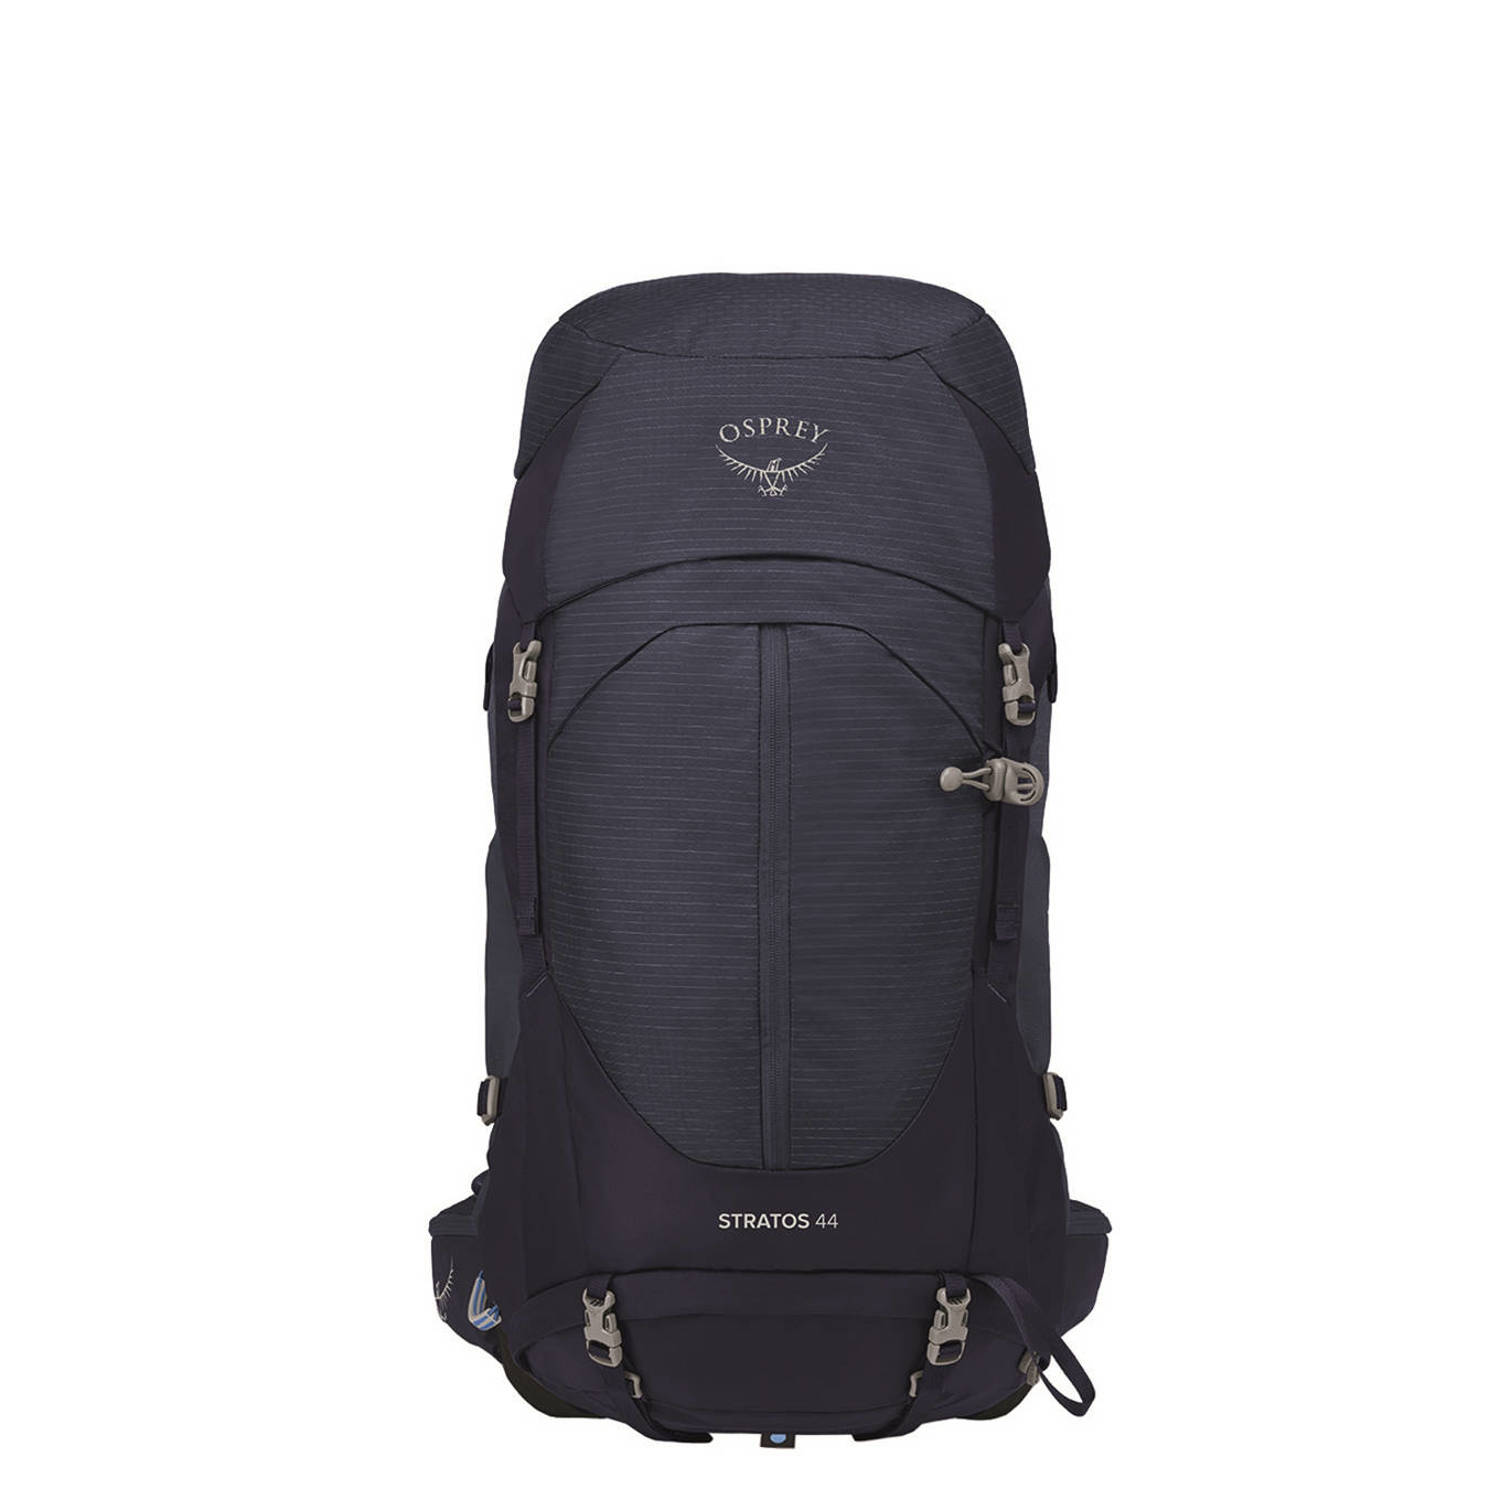 Osprey backpack Stratos 44L donkerblauw